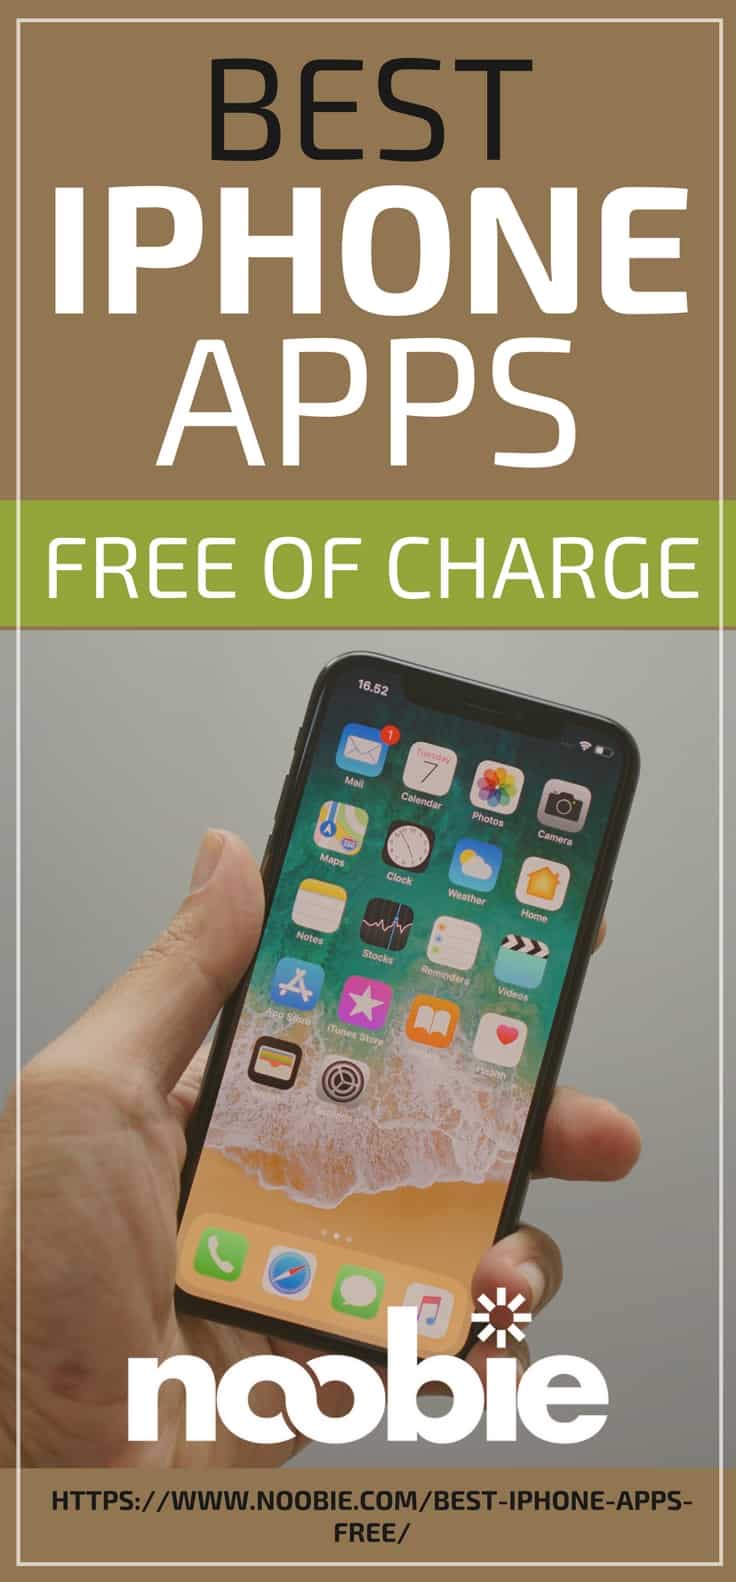 Best iPhone Apps Free Of Charge | top iphone apps | must-have iphone apps | https://noobie.com/best-iphone-apps-free/